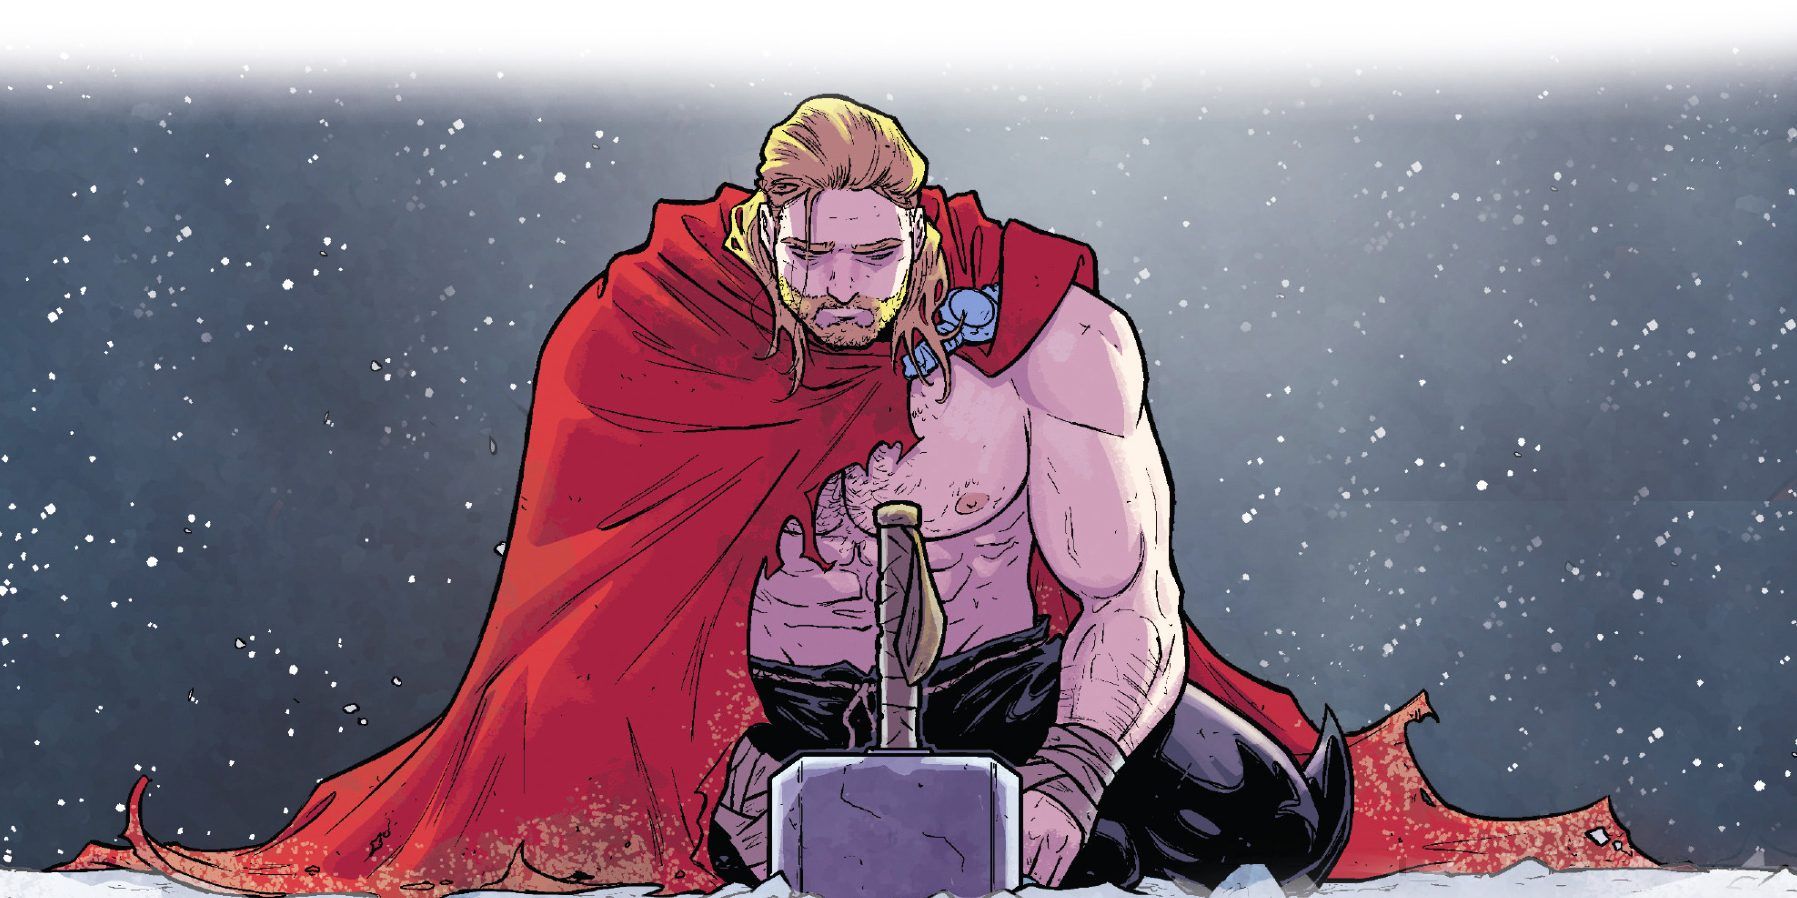 Unworthy Thor kneels by his hammer with a morose expression